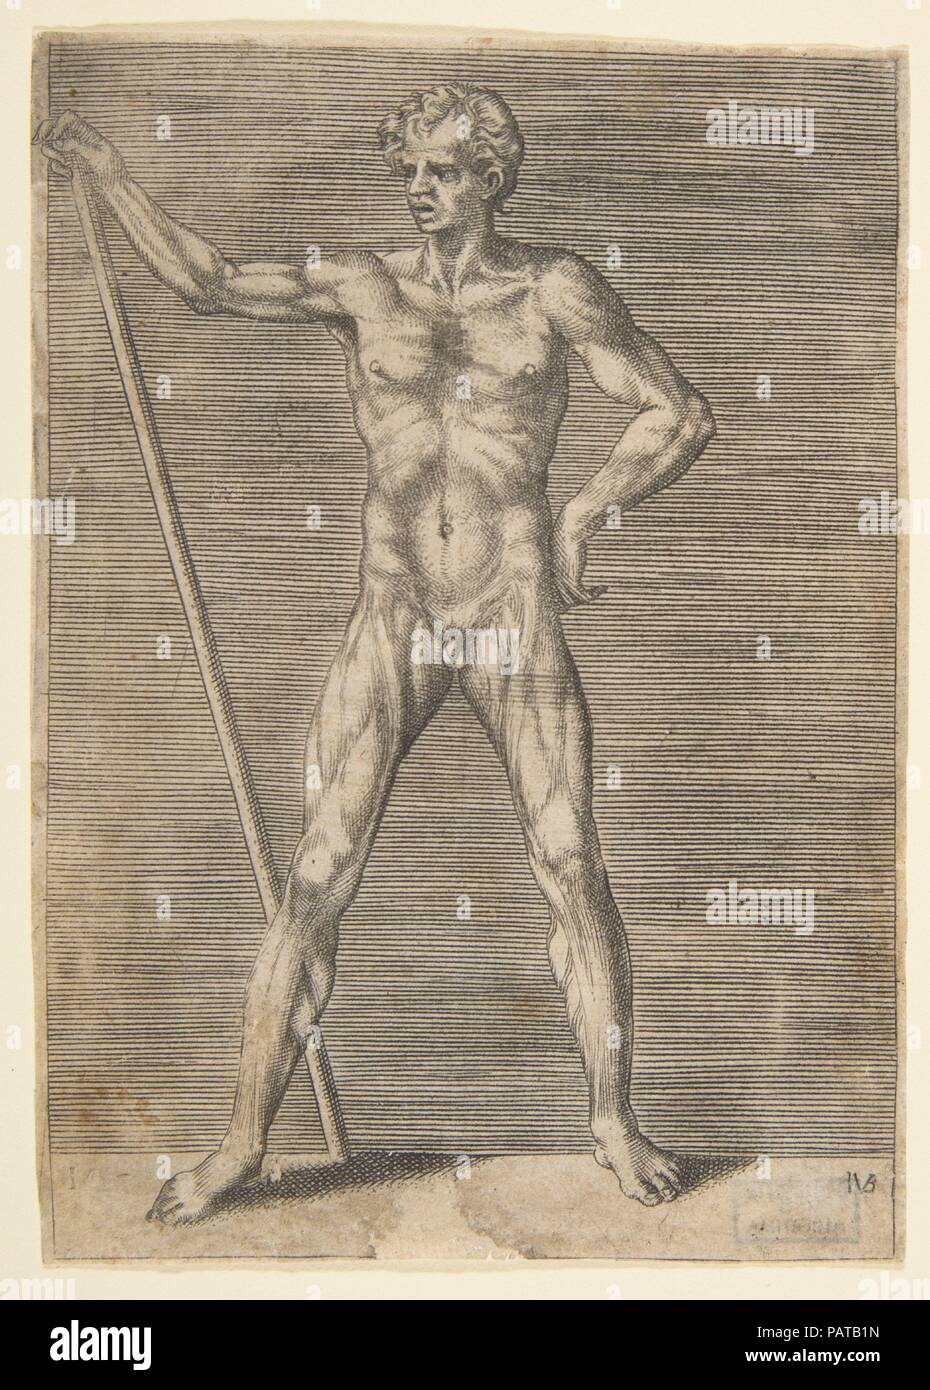 Flayed man seen from in front, holding a stick. Artist: Giulio Bonasone (Italian, active Rome and Bologna, 1531-after 1576). Dimensions: sheet: 6 1/16 x 4 5/16 in. (15.4 x 11 cm). Date: ca. 1531-76. Museum: Metropolitan Museum of Art, New York, USA. Stock Photo